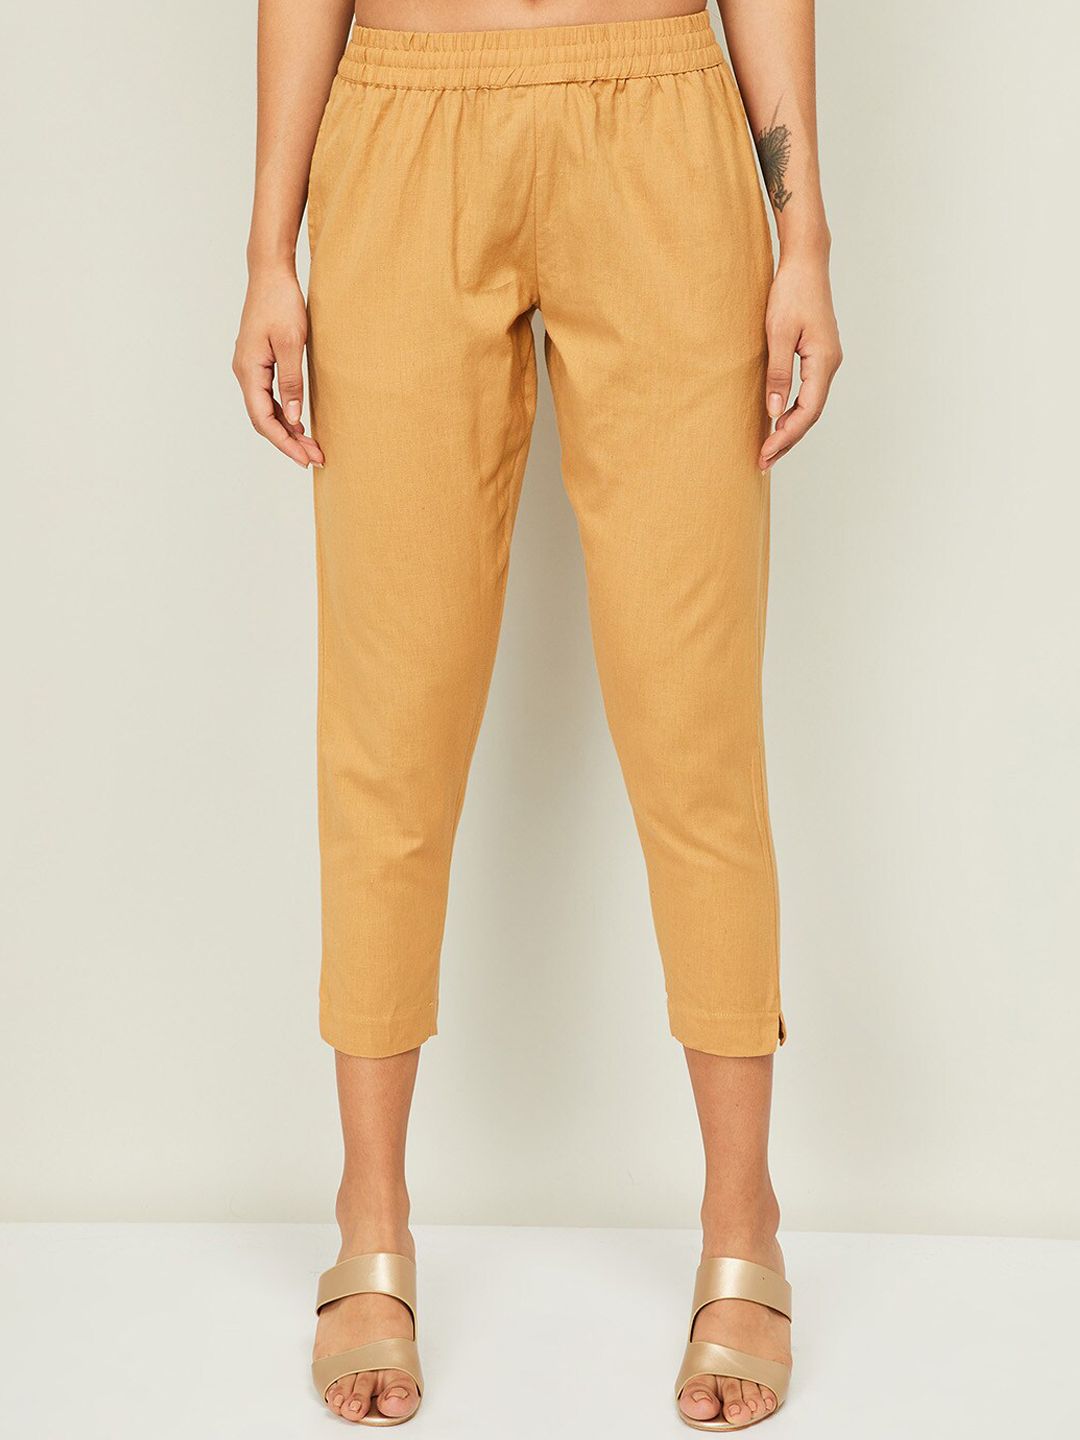 Melange by Lifestyle Women Gold-Toned Trousers Price in India